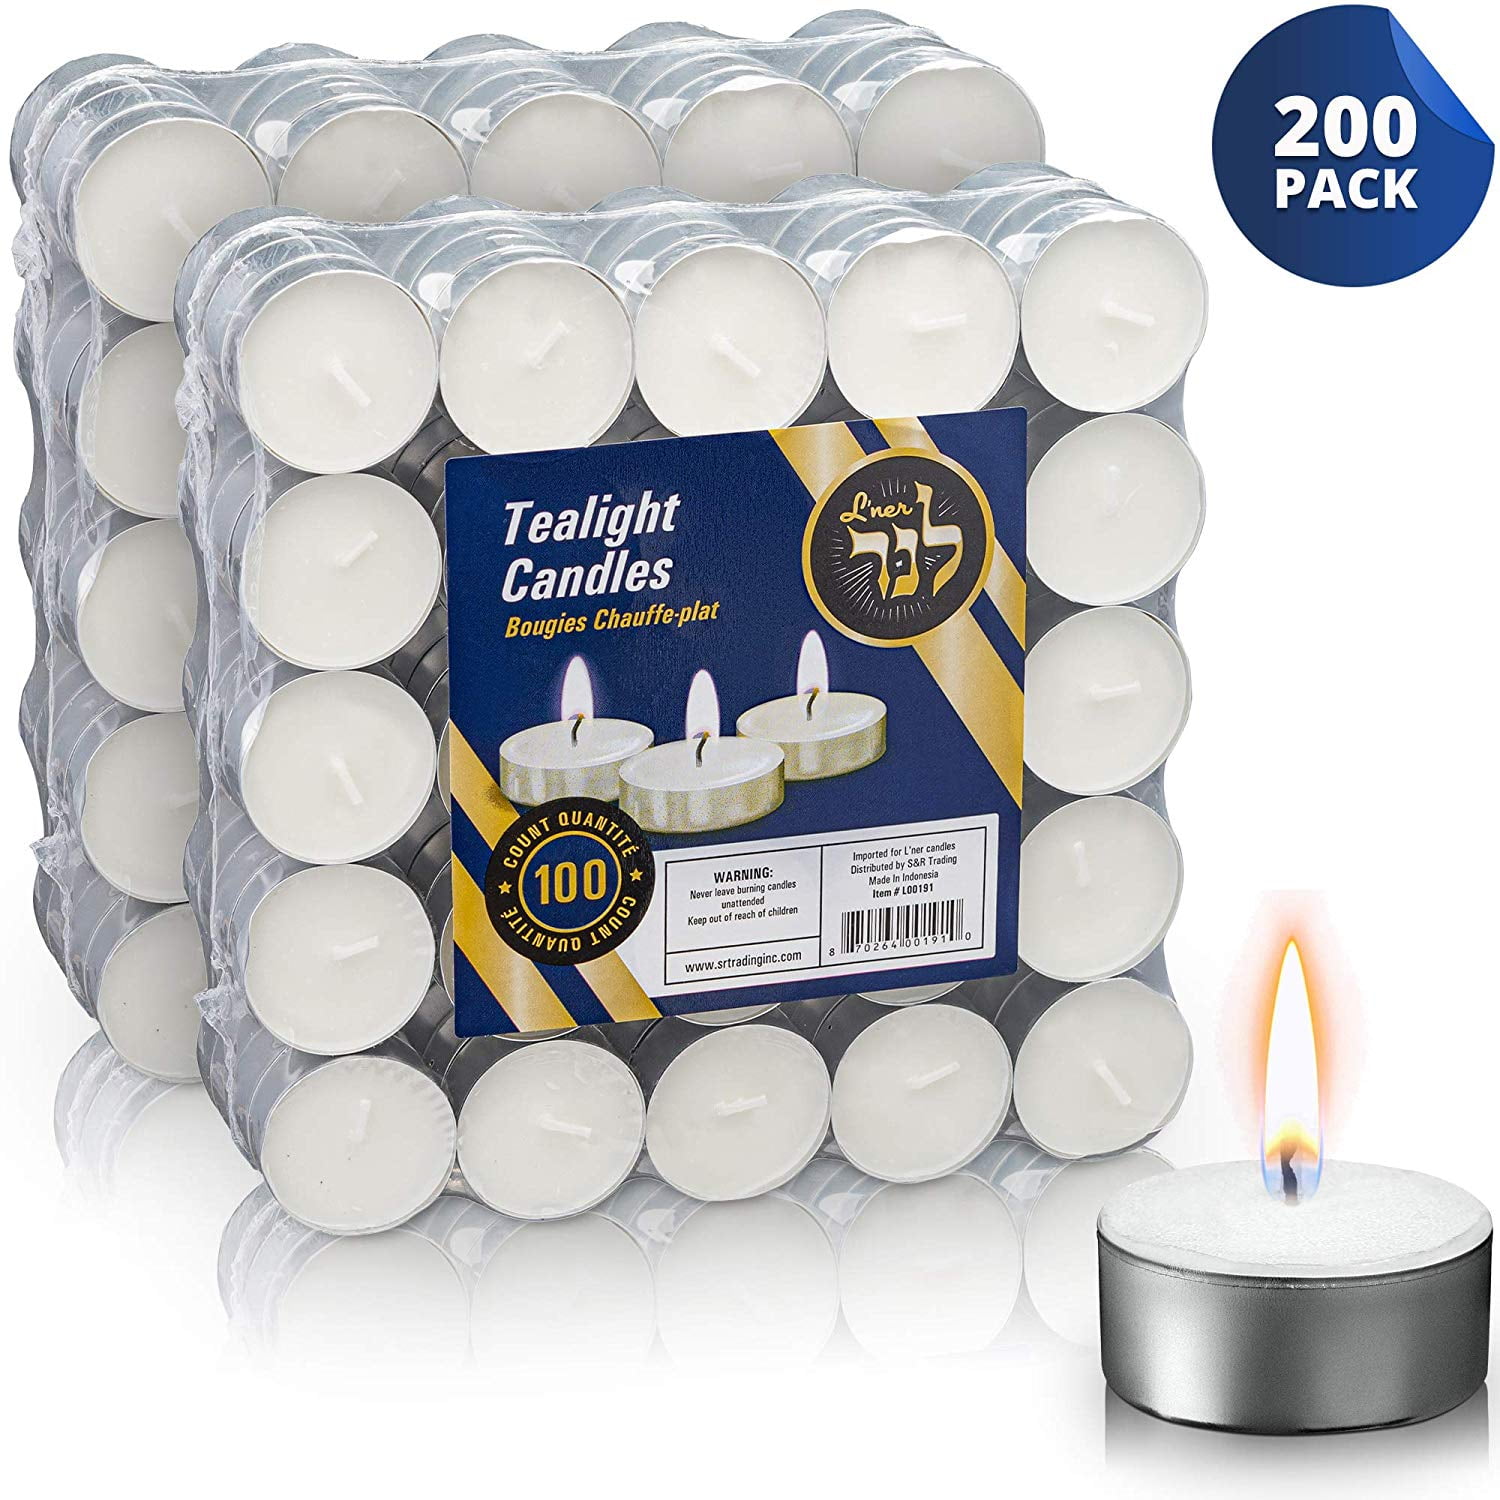 L'ner Tea Lights Candles - Pack of 200 White Unscented Candle Lights with  3.5 Hour Burning Time - Tea Candles for Wedding, Home, Parties, and Special  Occasions 